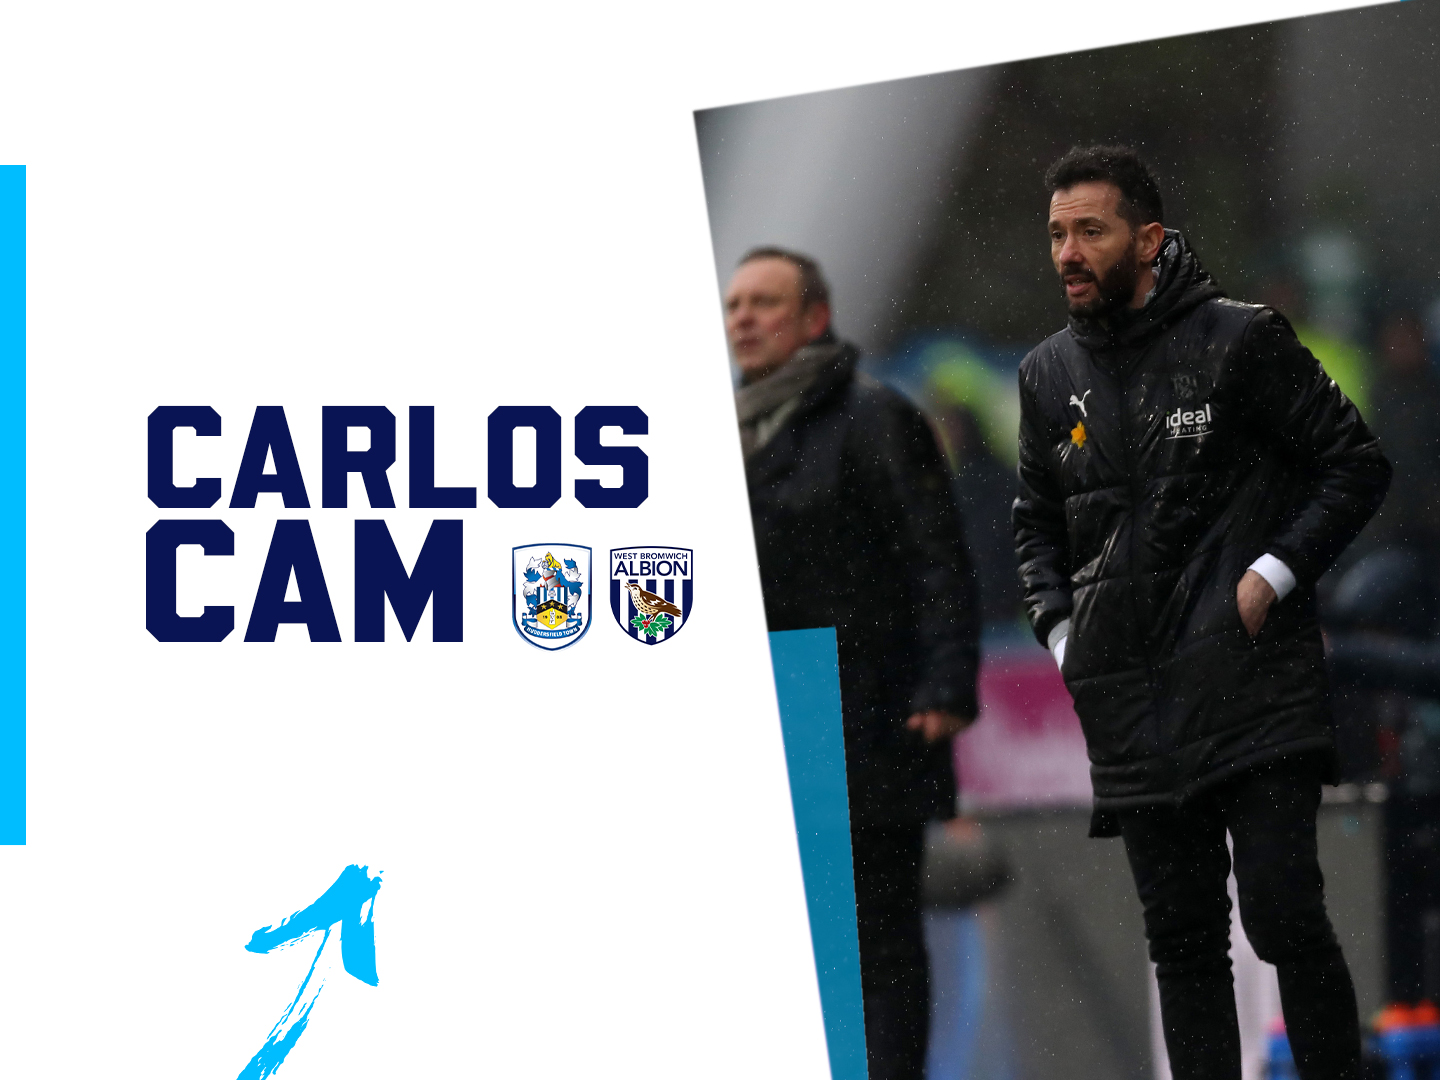 A photo graphic, showing the club crests of Huddersfield and Albion, along with a photo of Carlos Corberán with the title 'Carlos Cam' alongside it